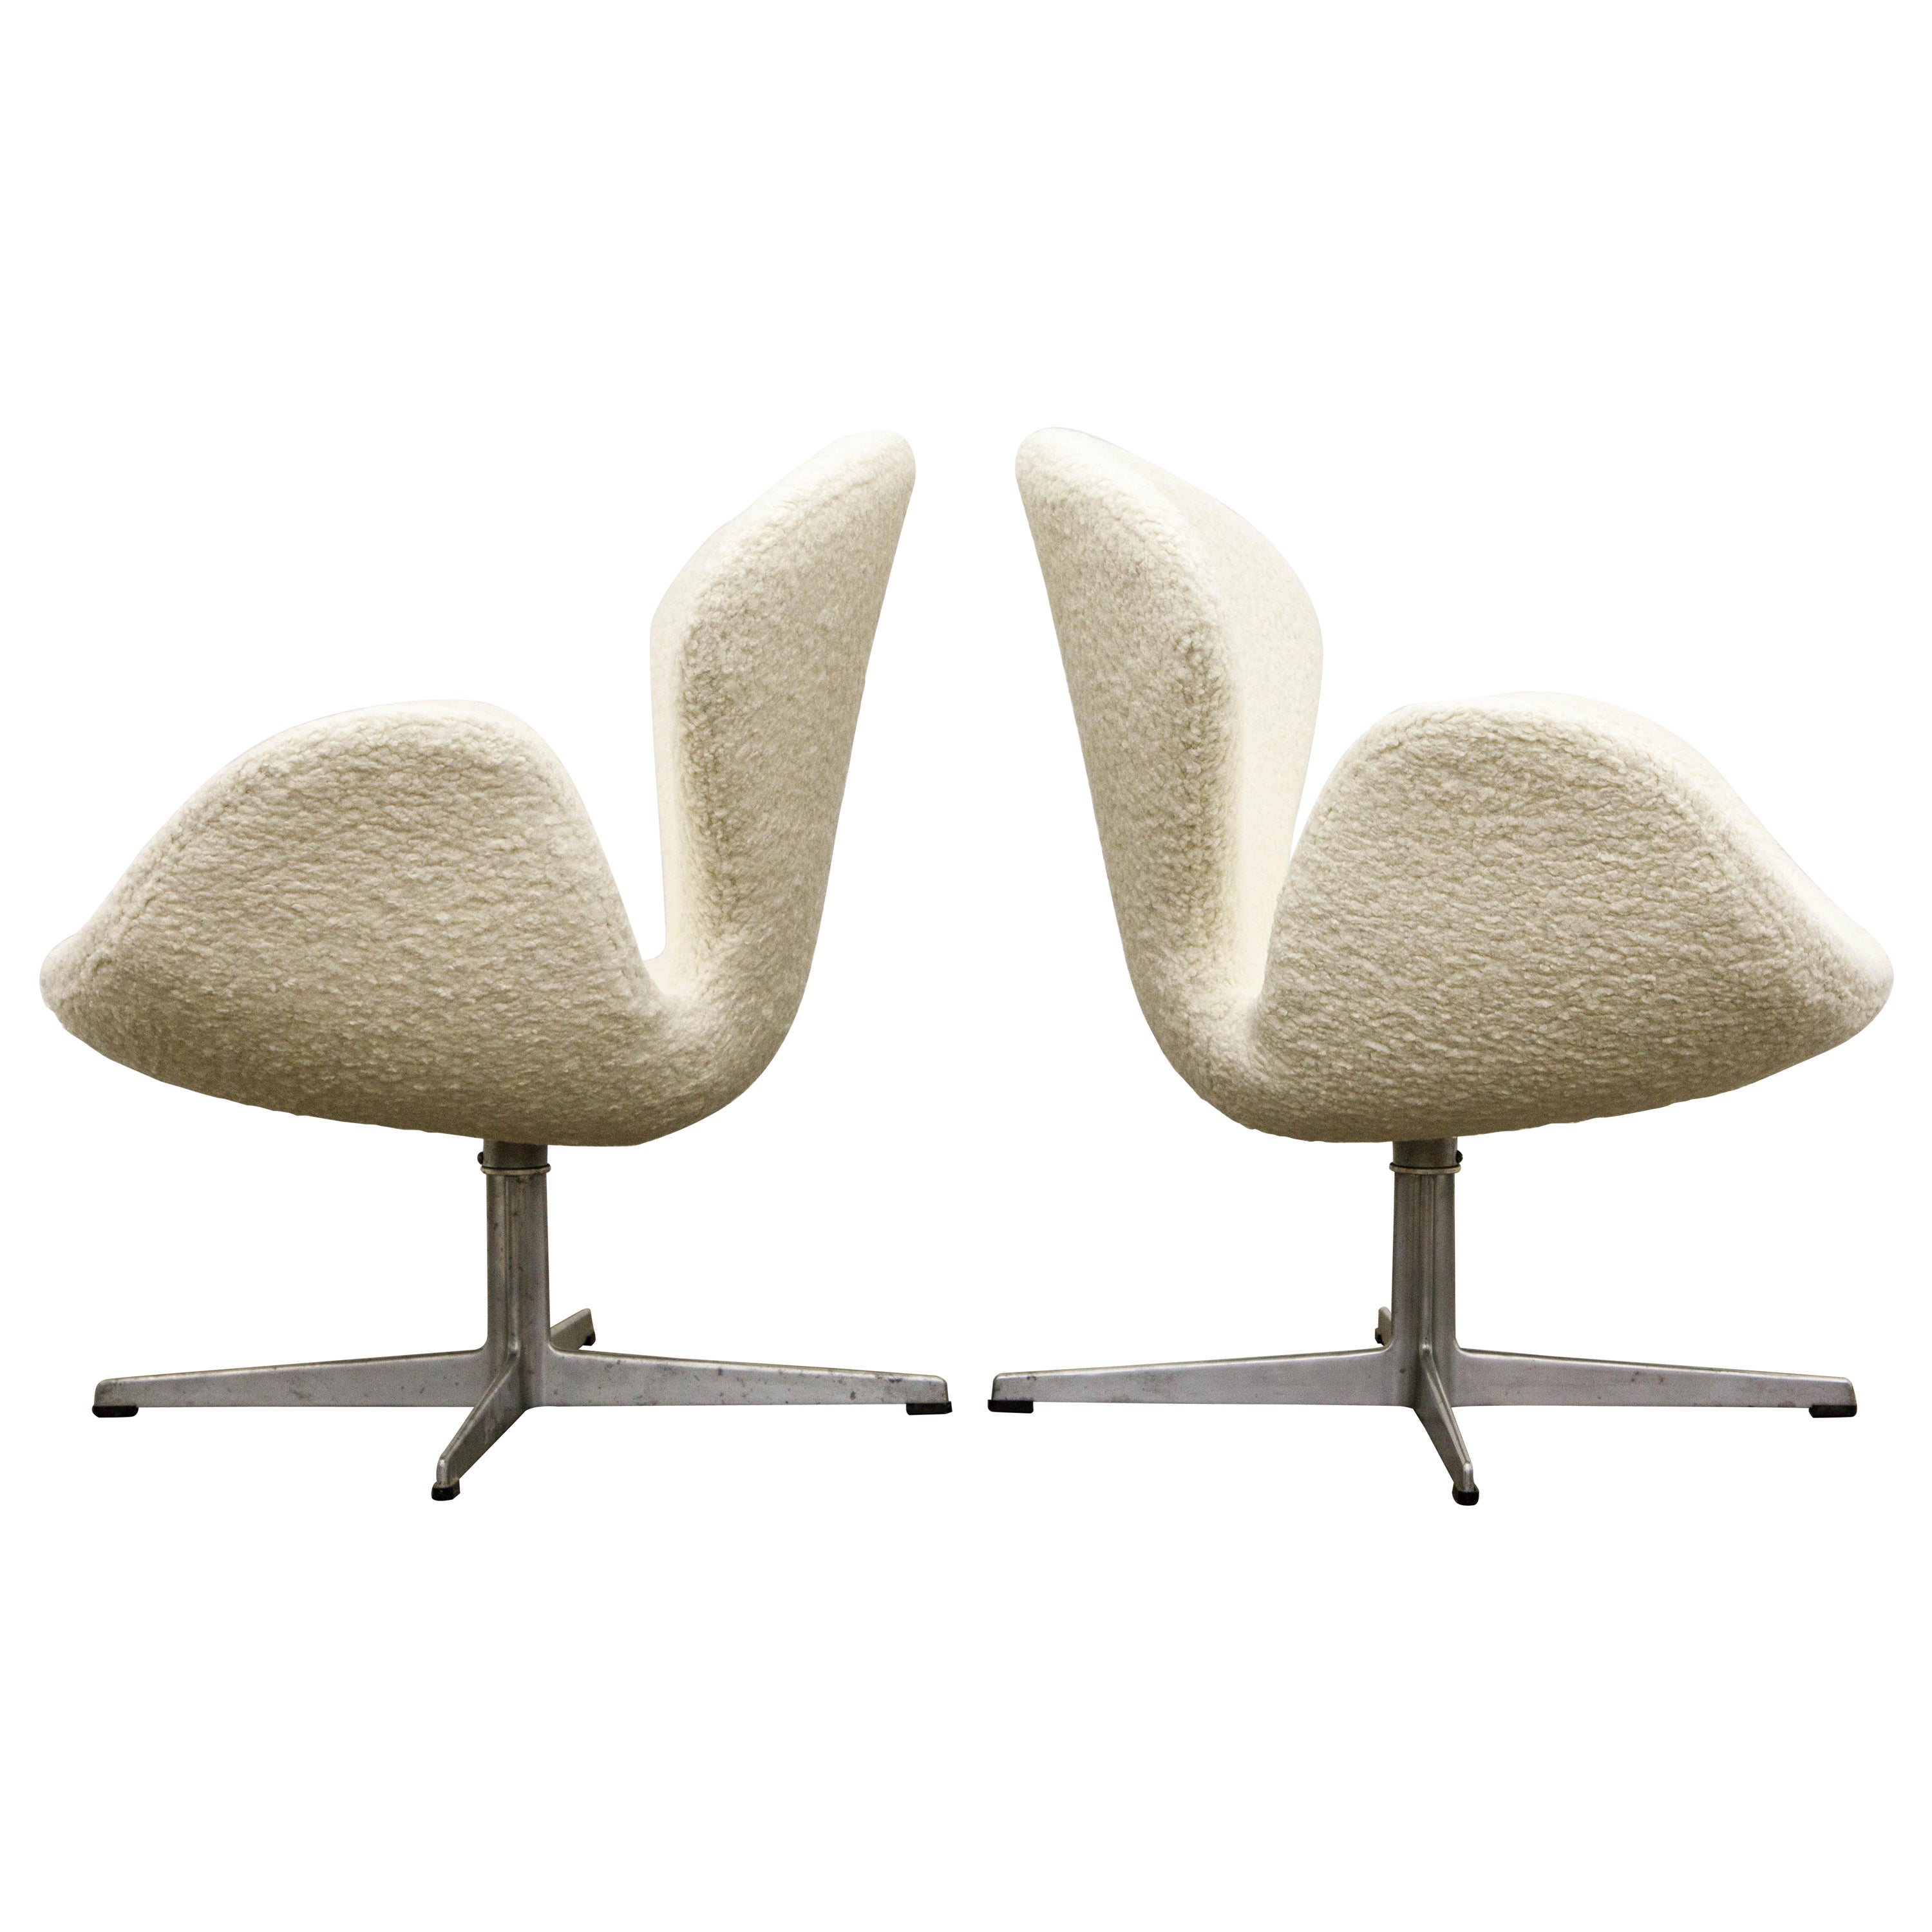 'Swan' Chairs in Bouclé by Arne Jacobsen for Fritz Hansen, Signed and Dated 1969